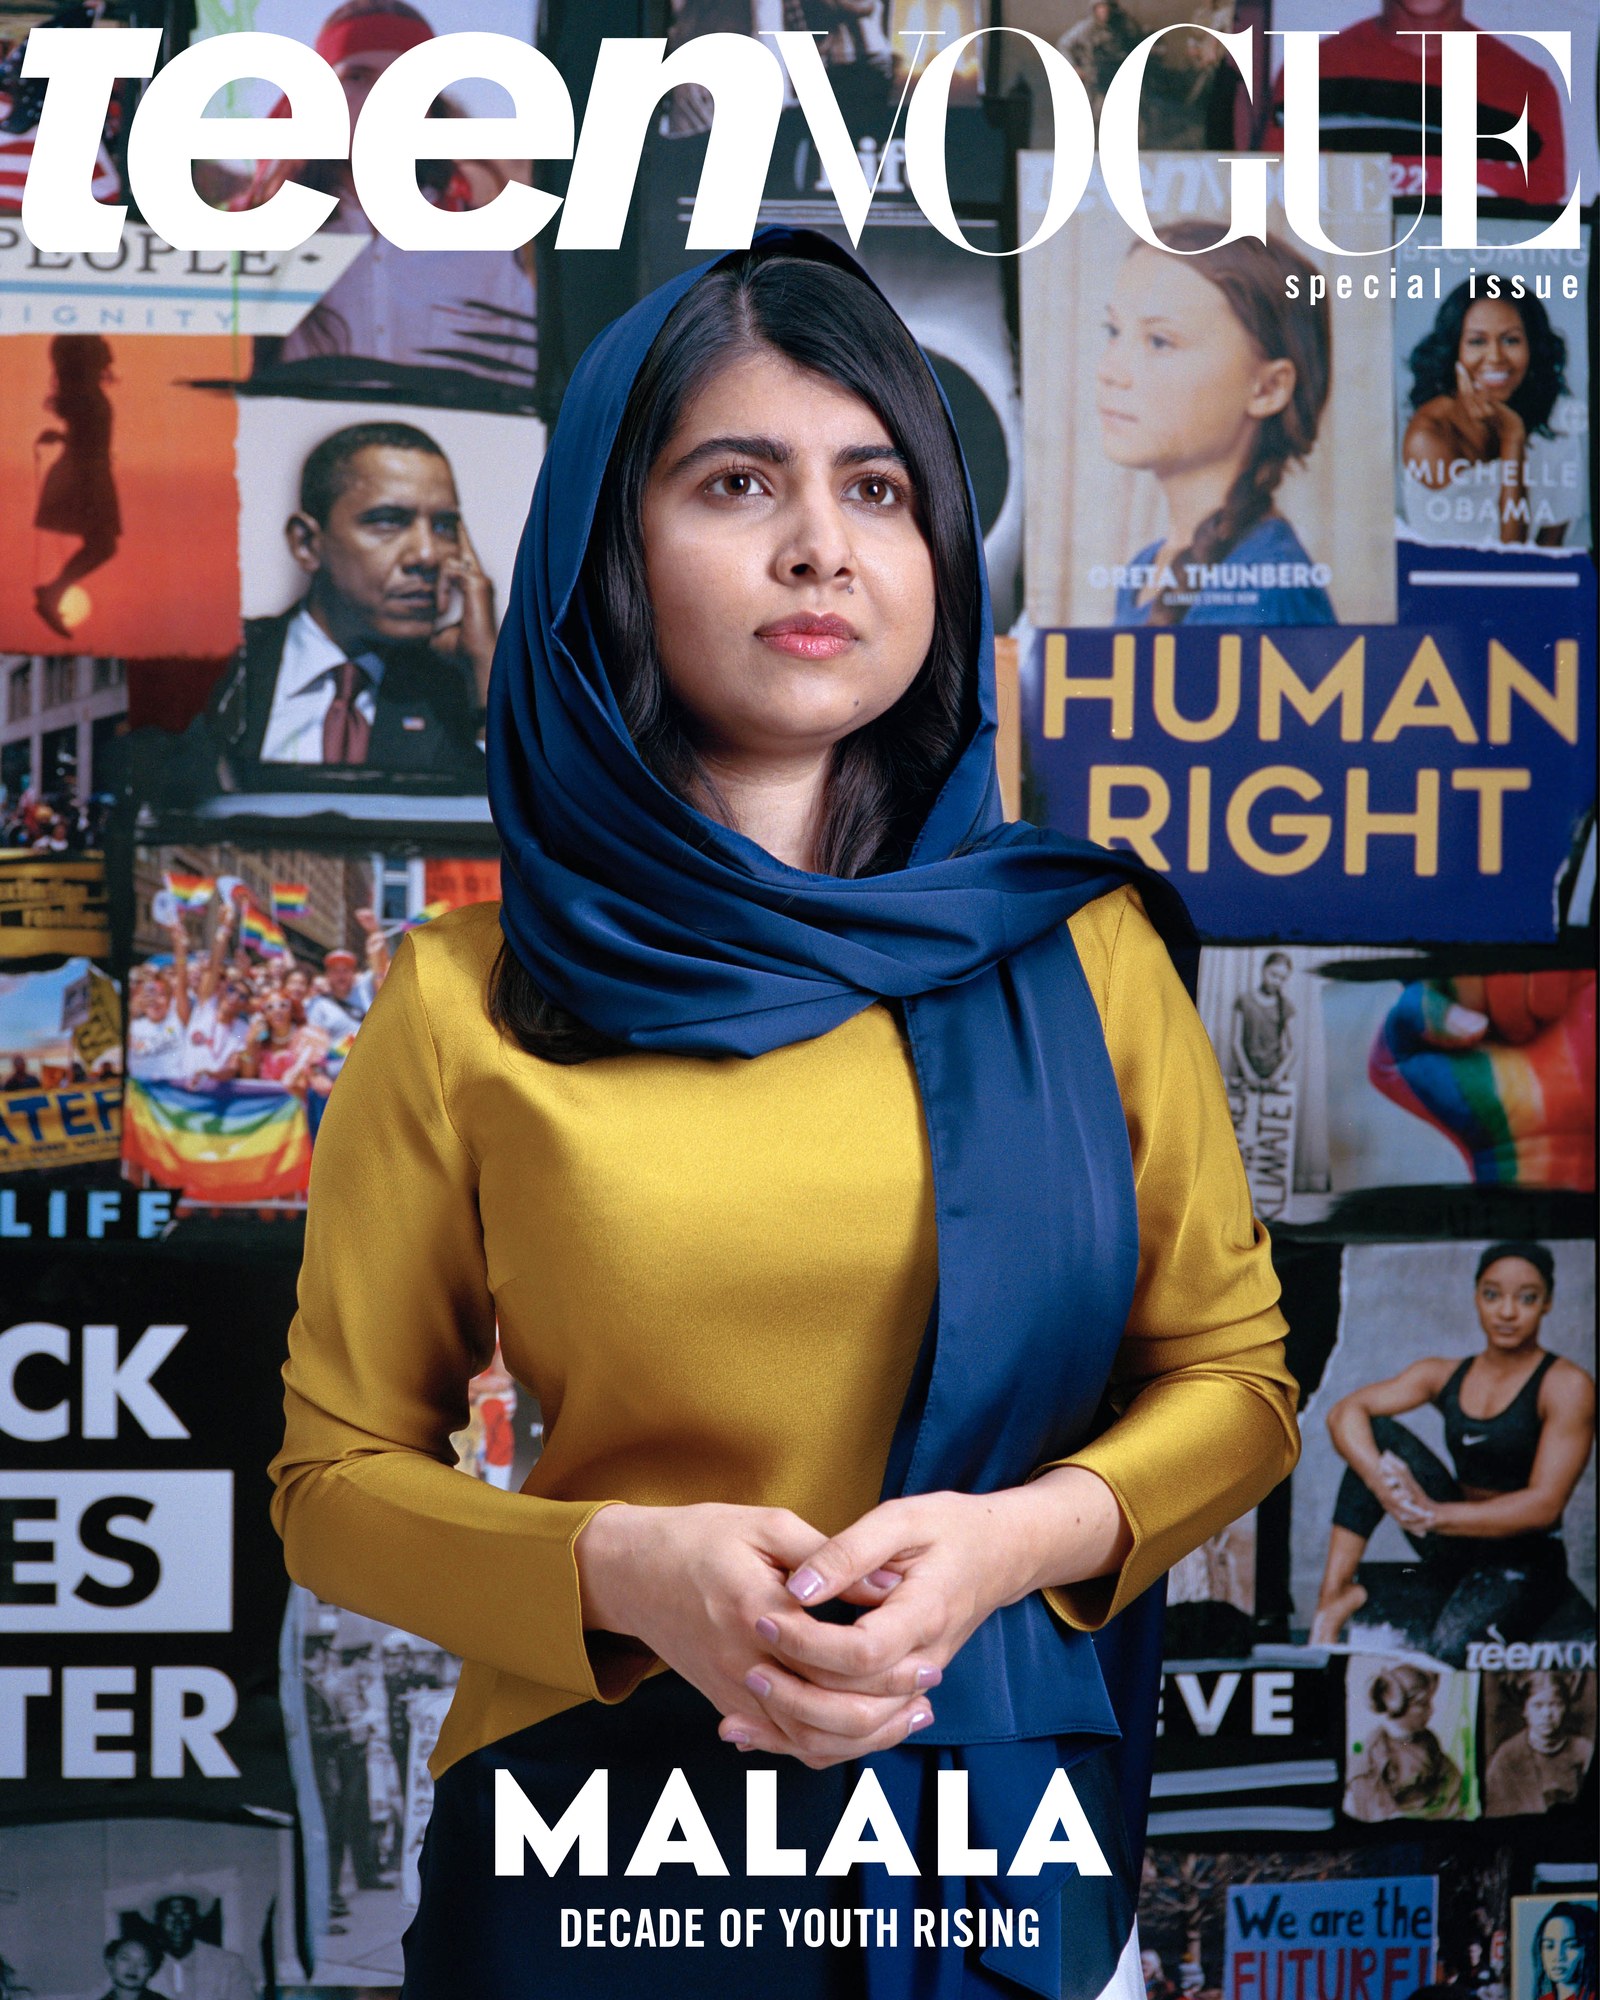 Malala becomes the face of Teen Vogue’s final cover of the decade